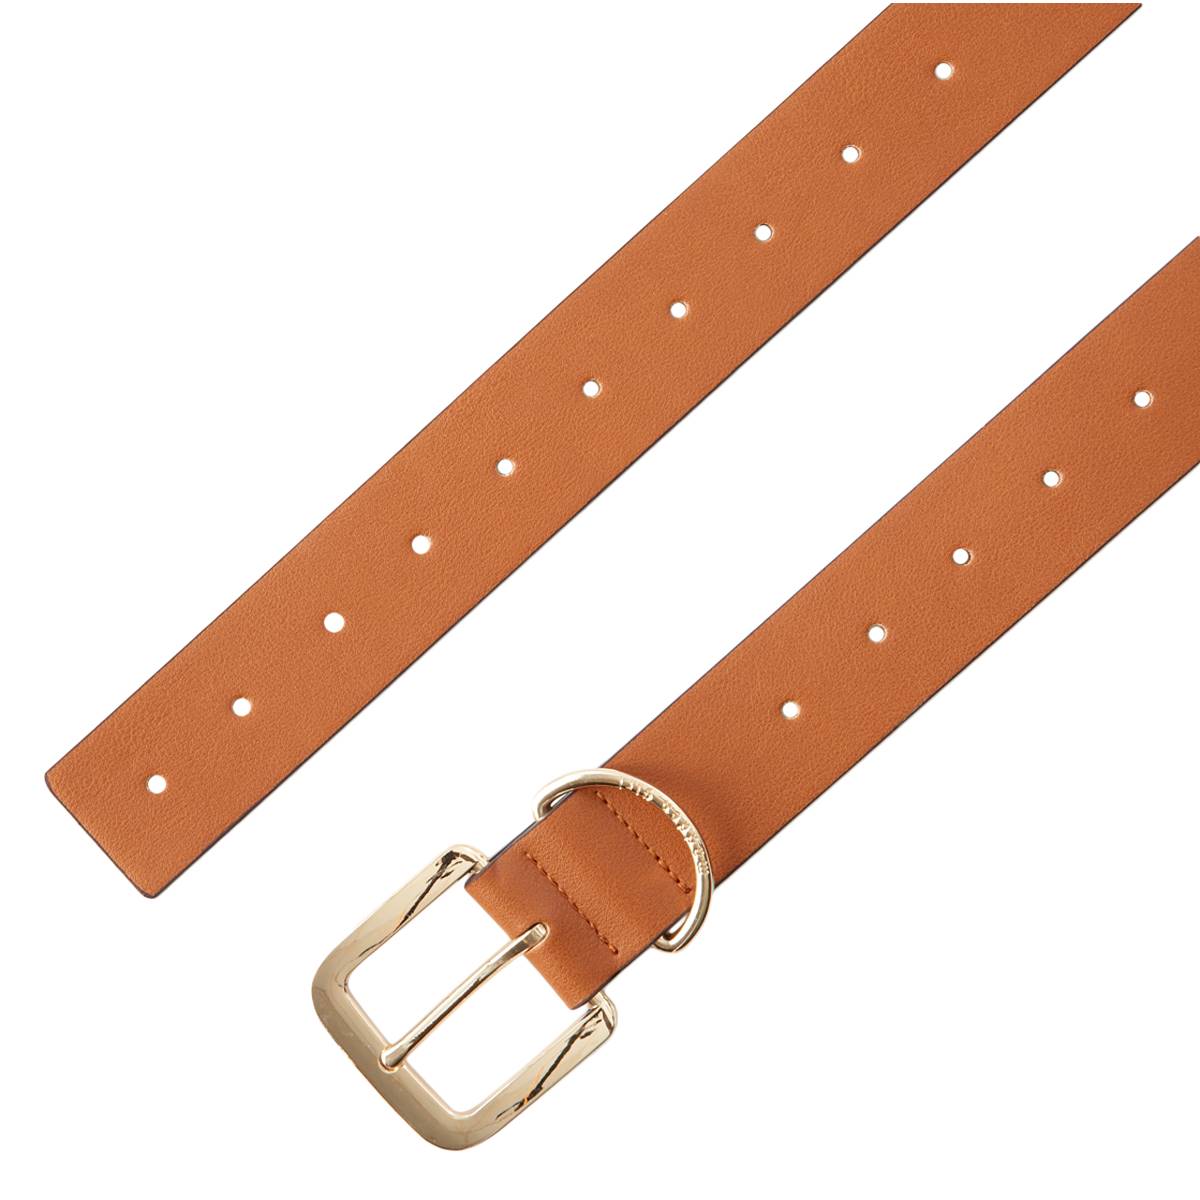 Womens Madden Girl Belt With D Ring Loop